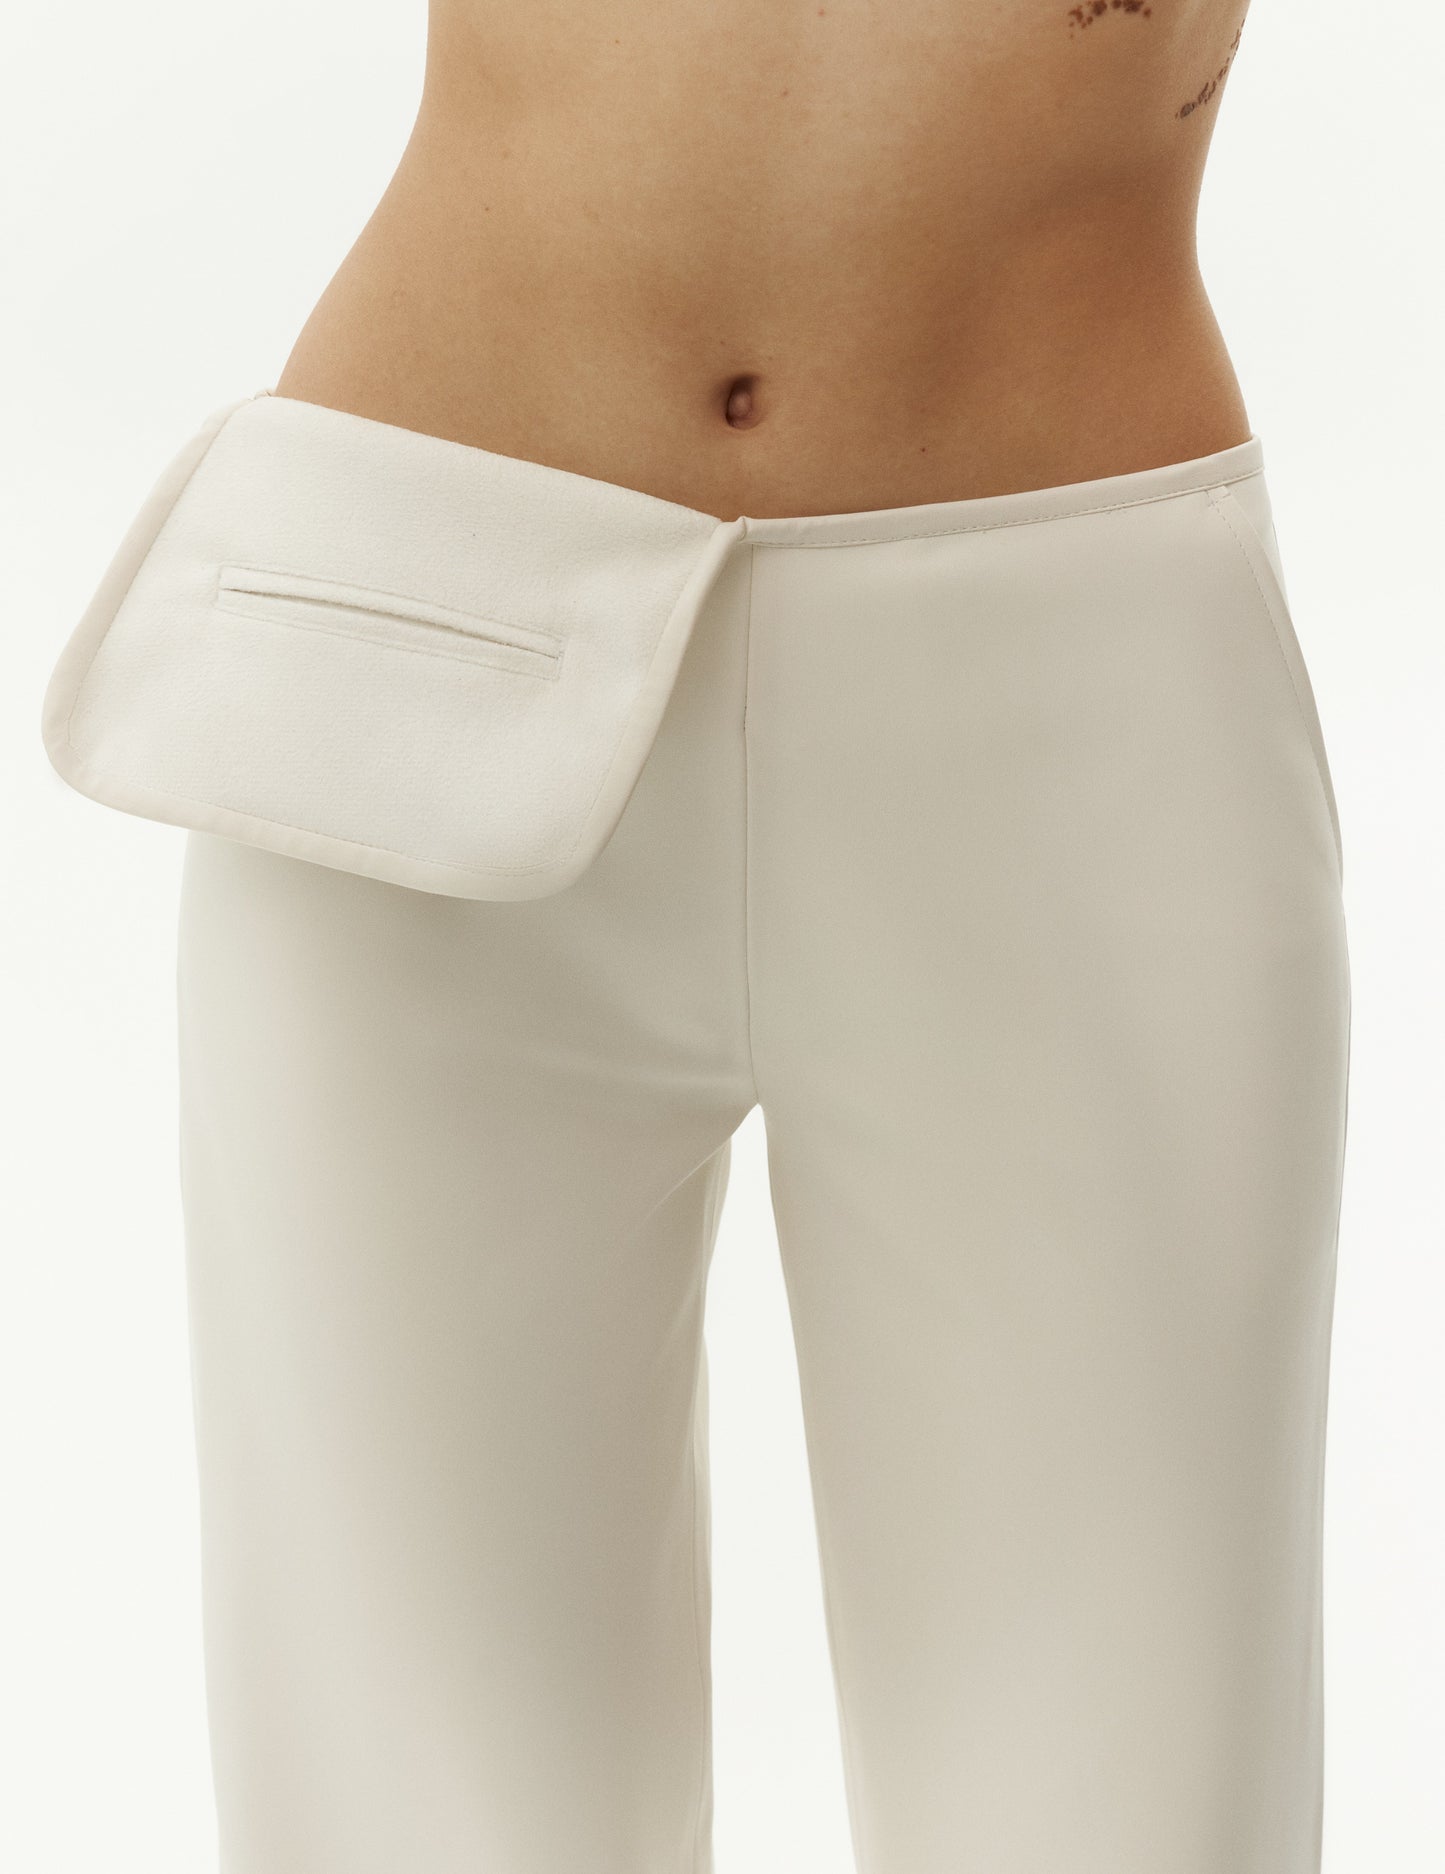 Faux Leather Pants with Patch Pocket Detail from FORMA brand